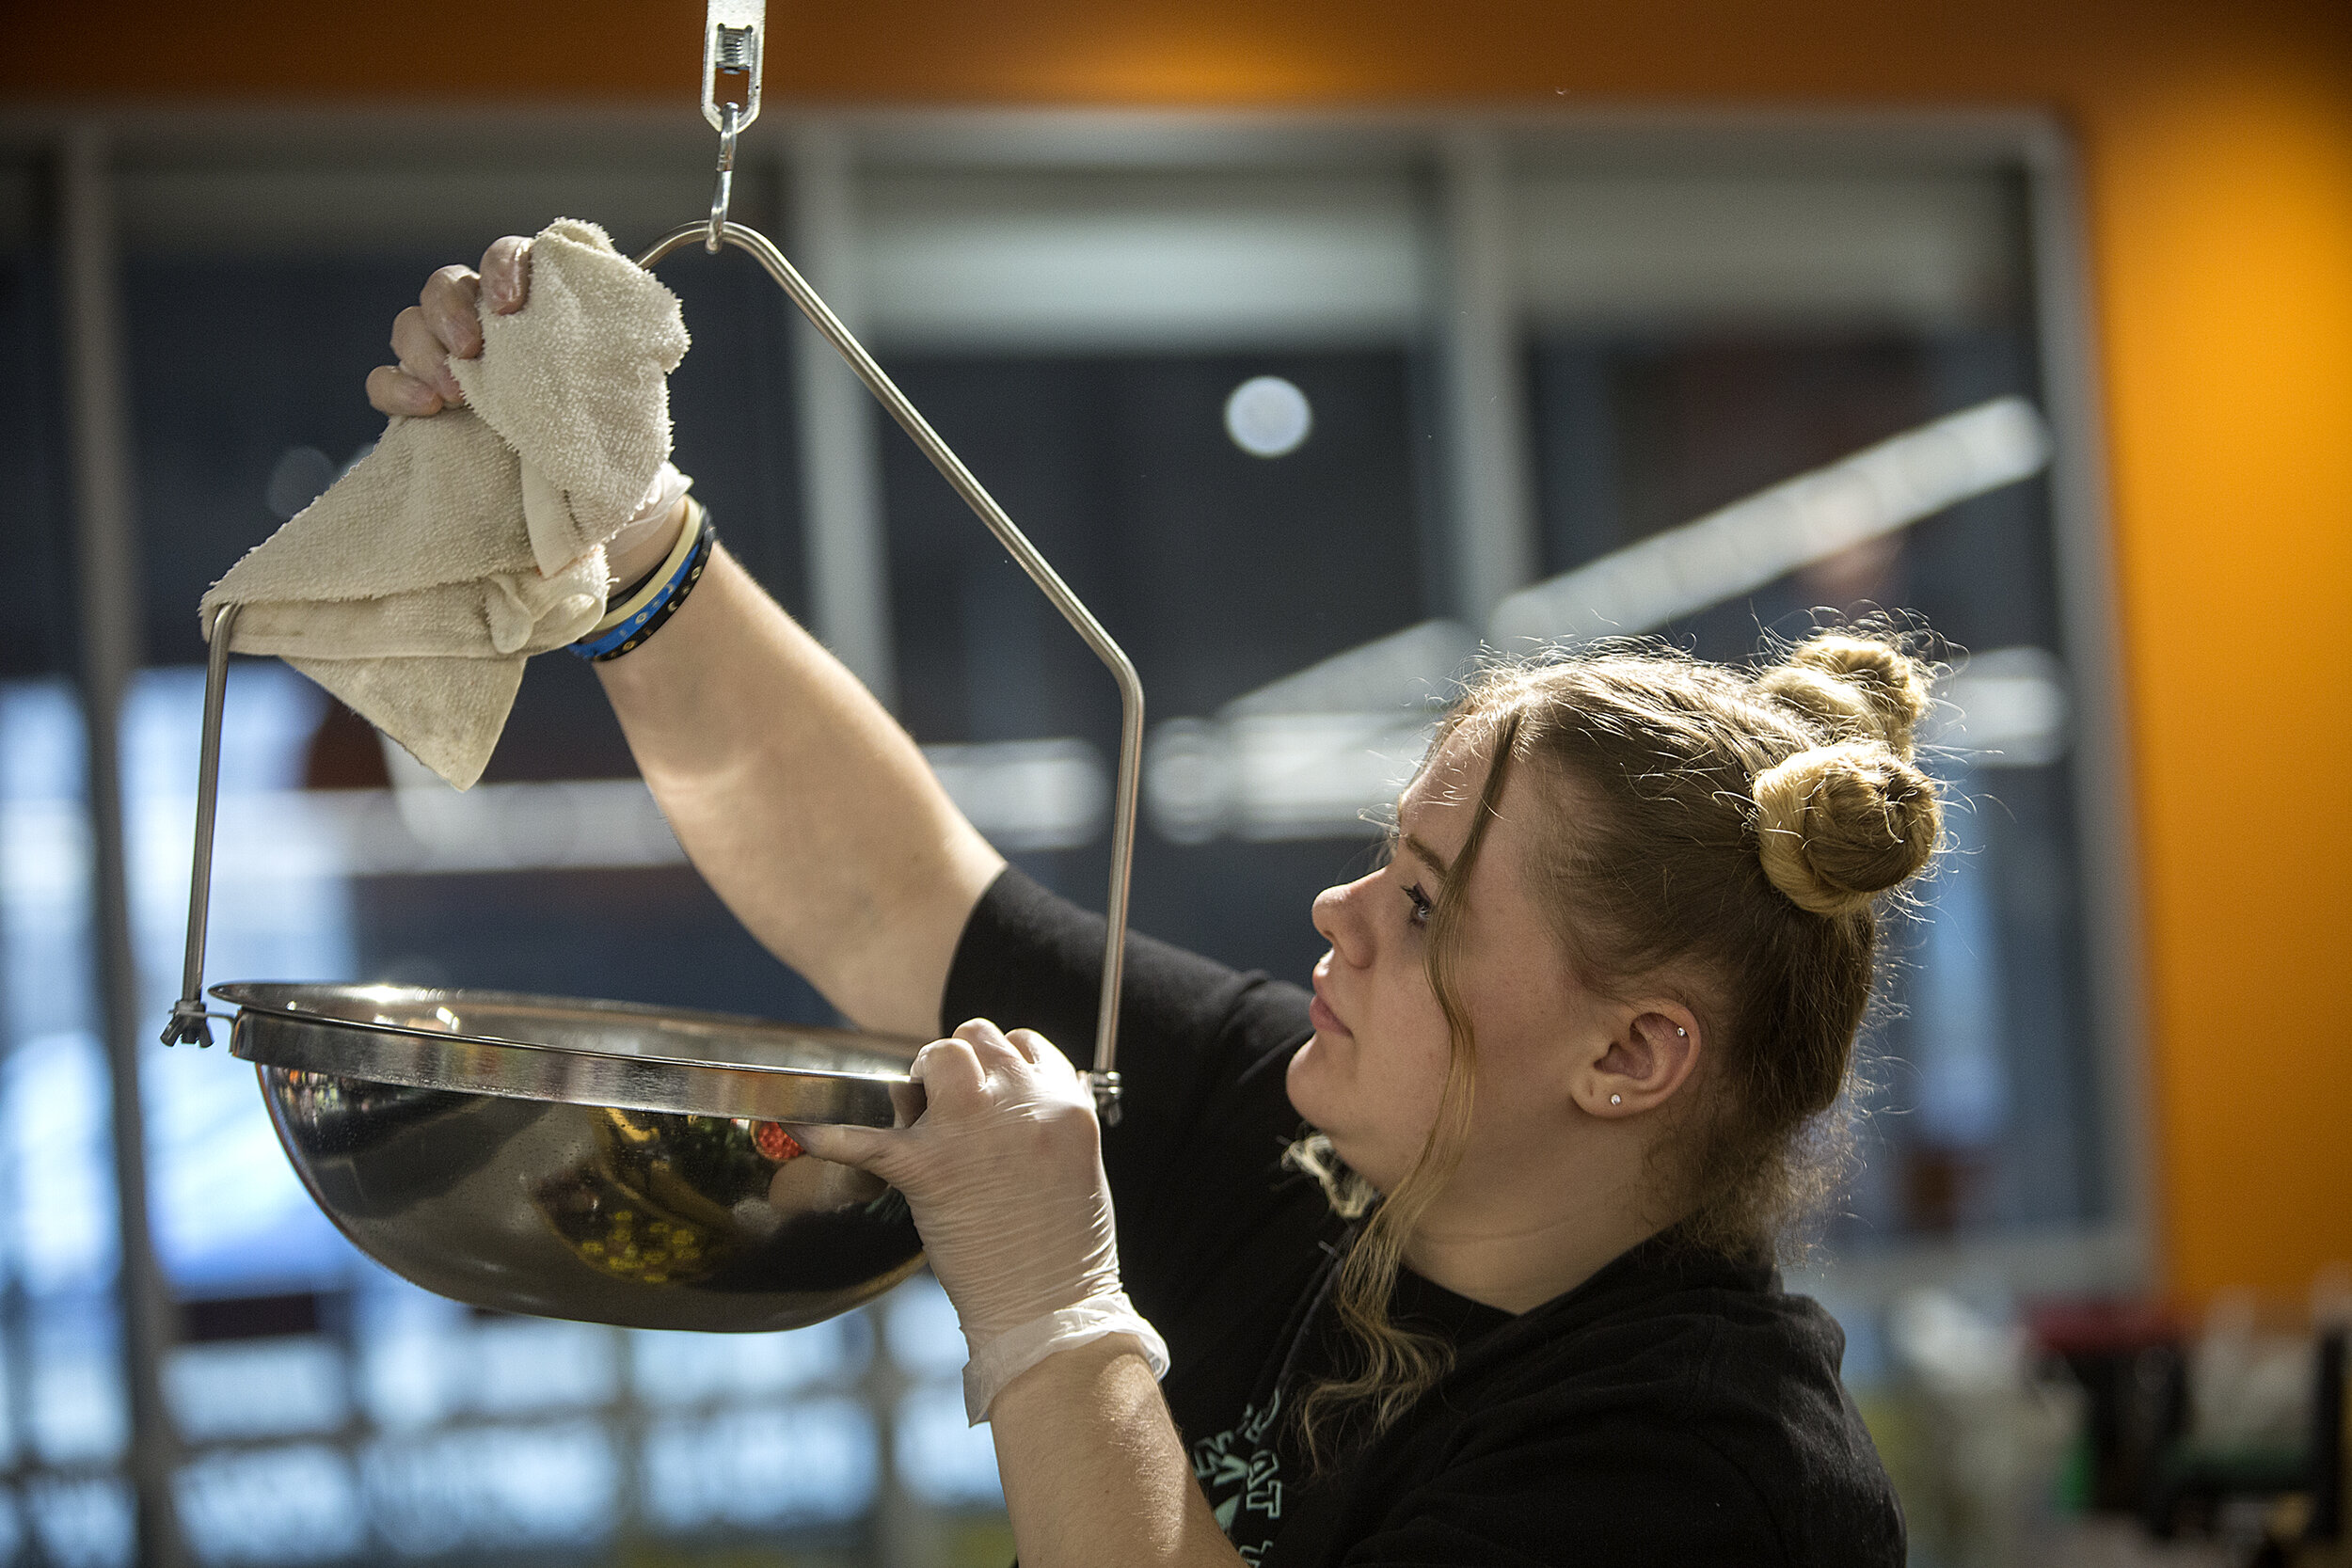  Emily Fridolfson disinfects a produce scale at North Market, which has new cleaning protocols because of the outbreak. Emily and her sister, Marbry, clean surfaces around the store at the top of each hour. It takes about 30 minutes to complete.  